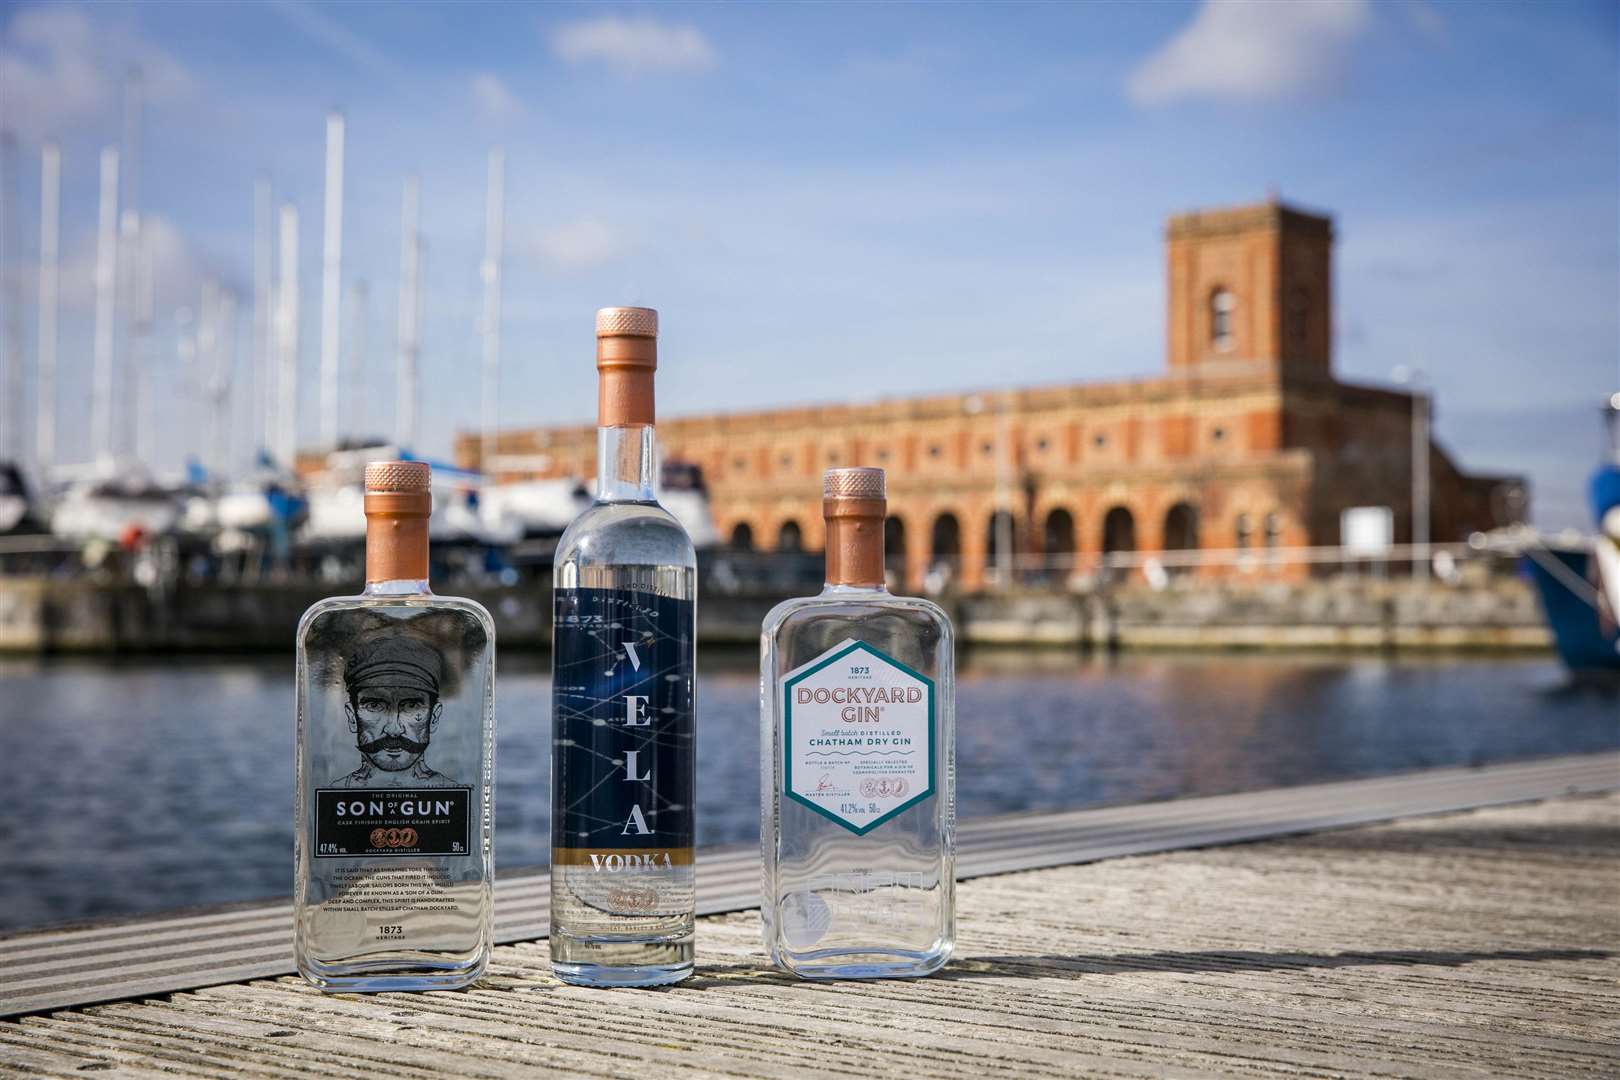 Copper Rivet distillery in Chatham already makes a range of spirits including gin and vodka